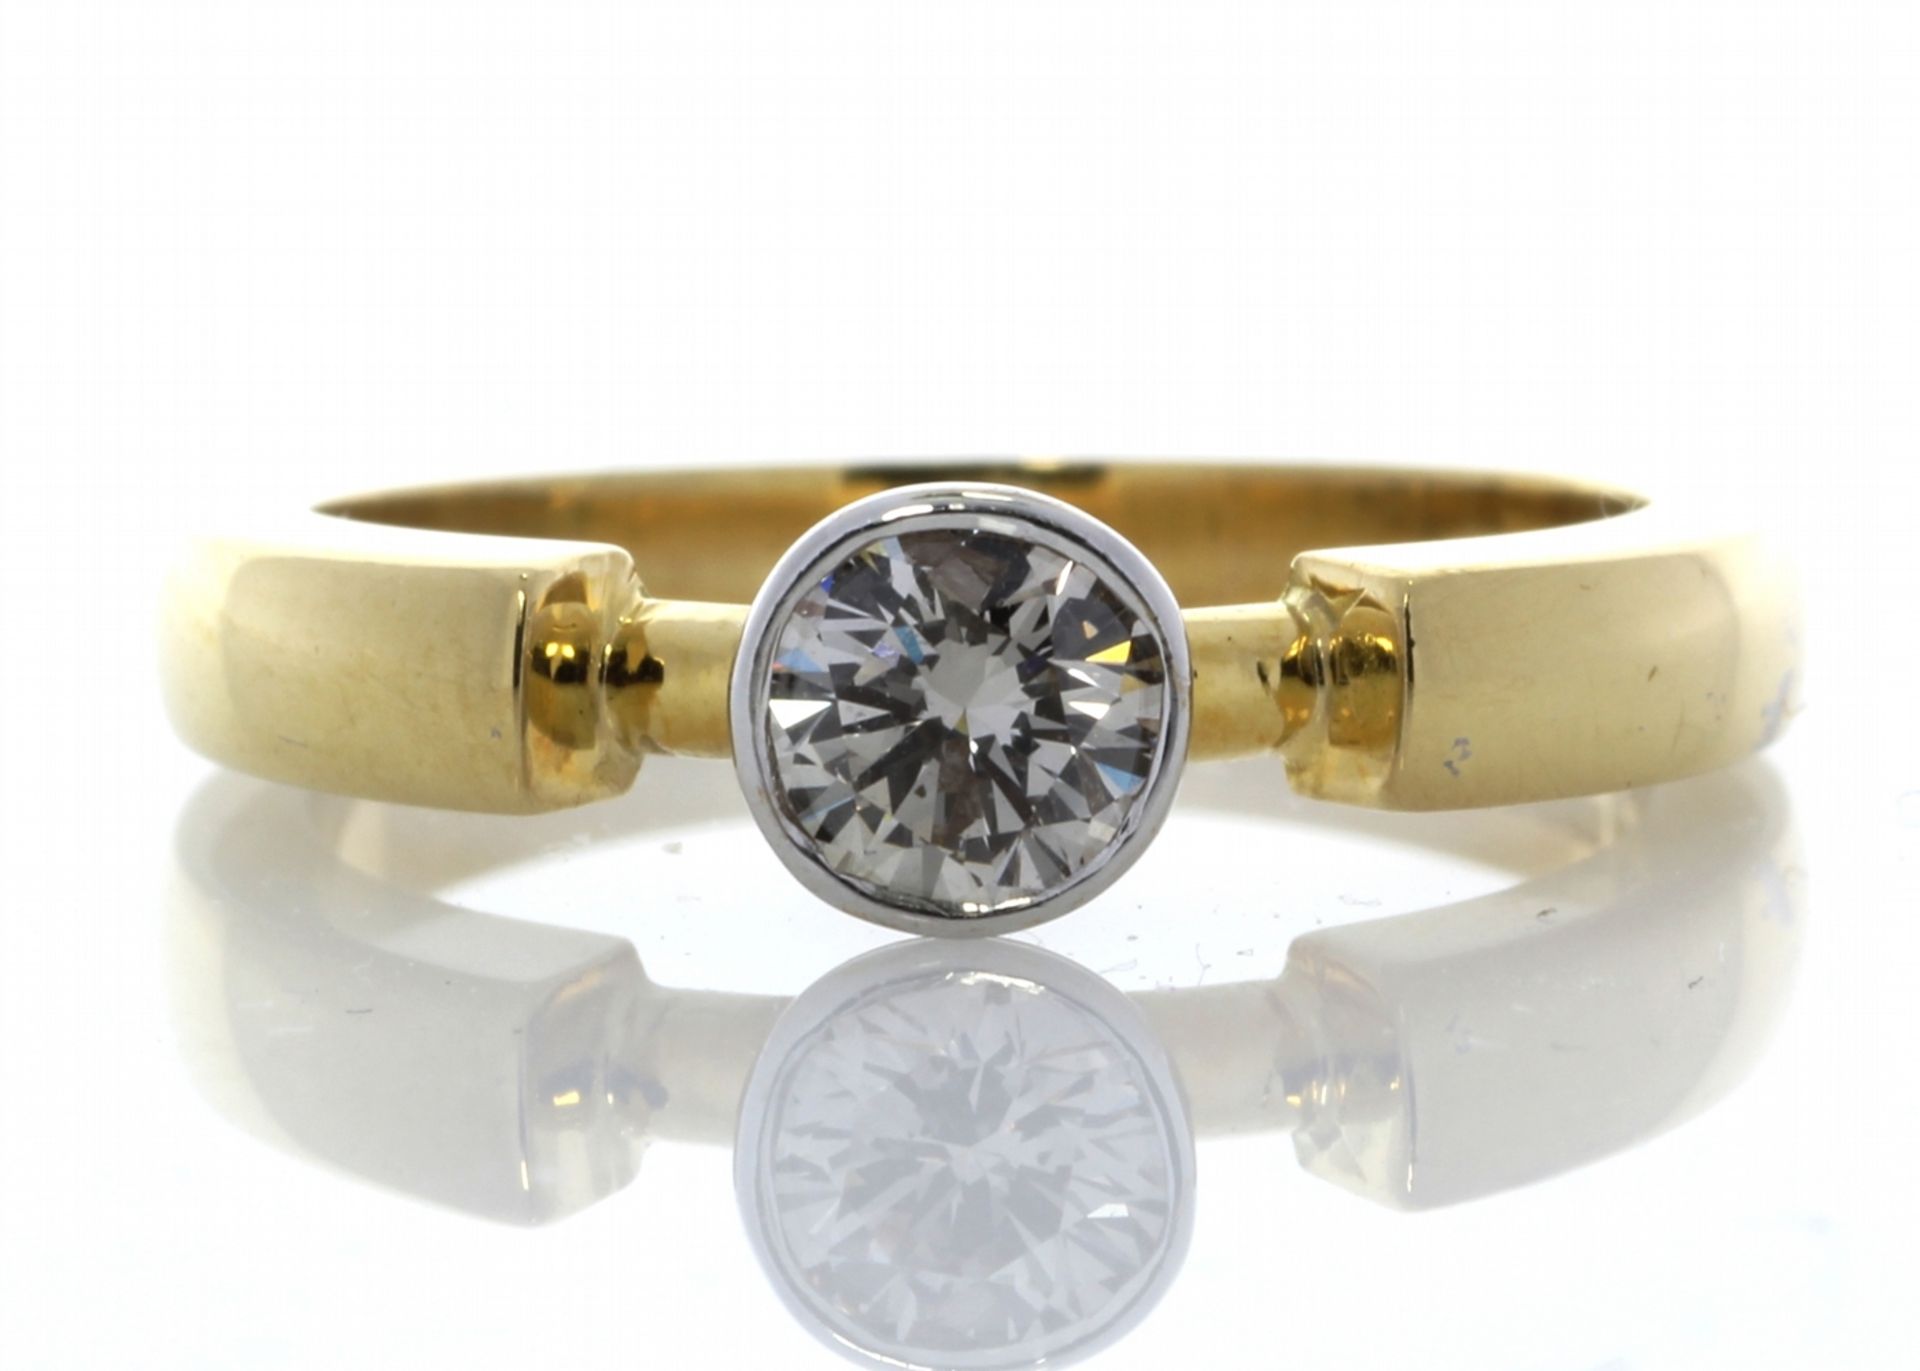 18ct Single Stone Fancy Rub Over Set Diamond Ring 0.53 Carats - Valued by GIE £9,950.00 - A